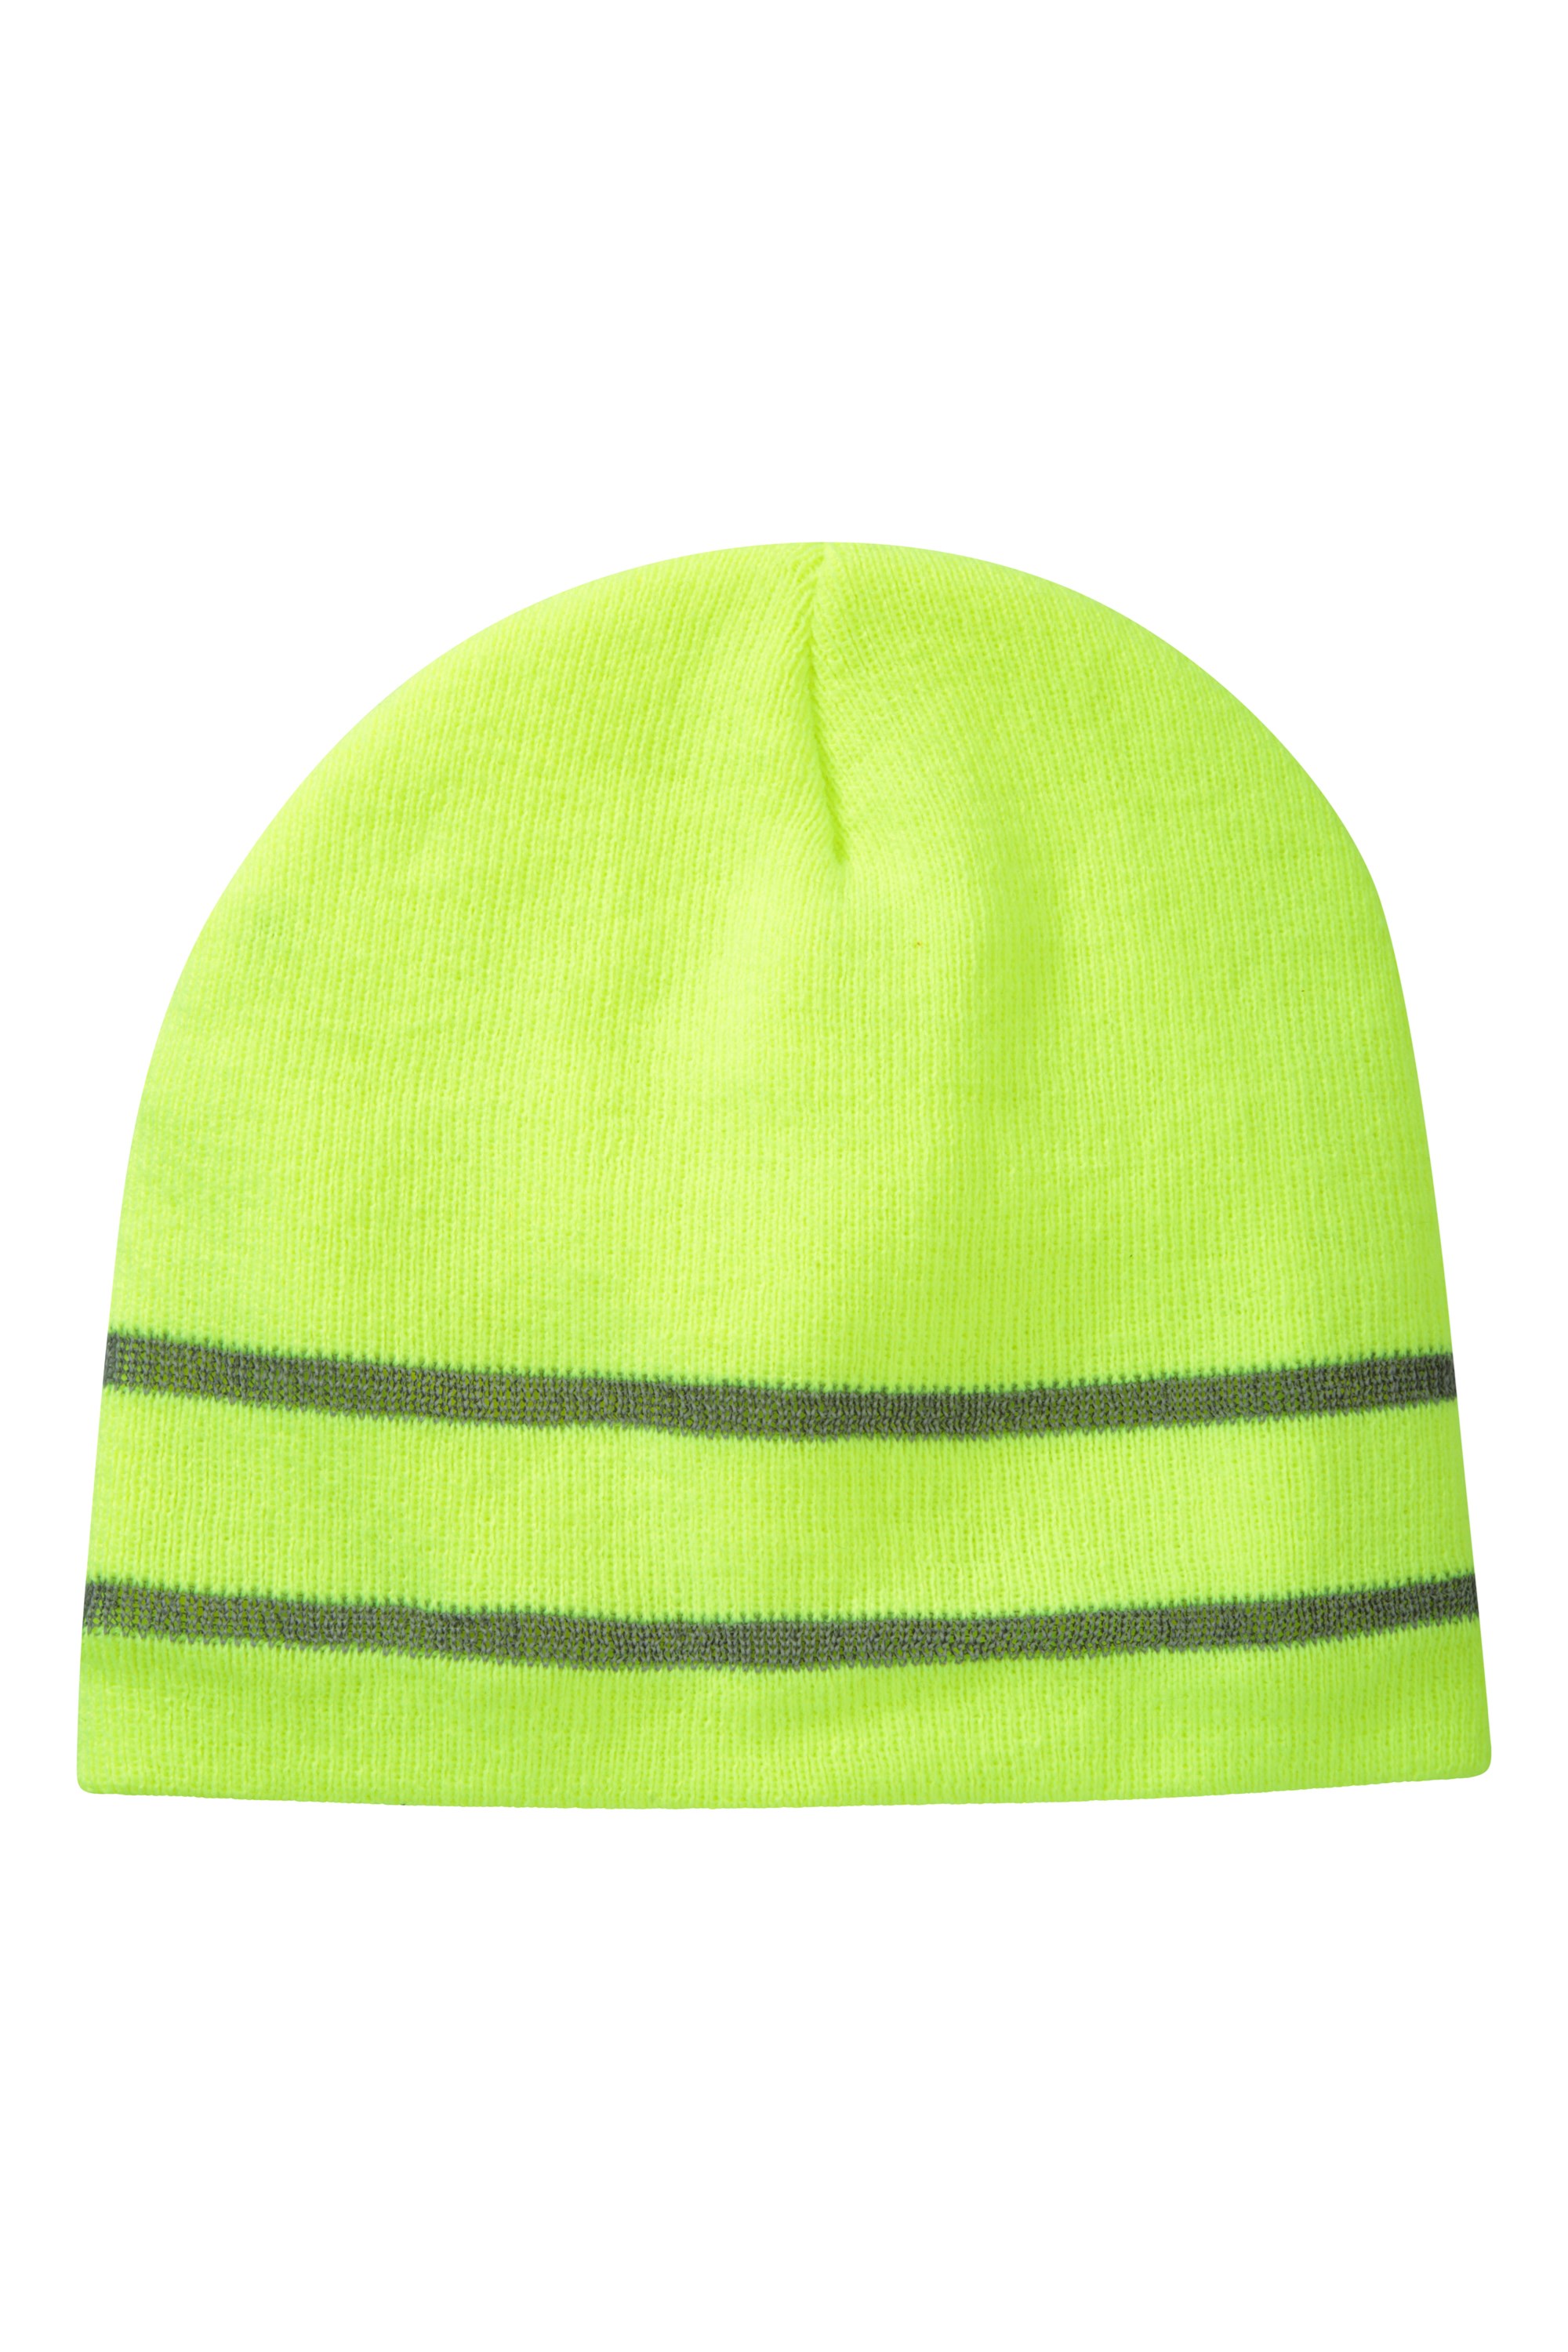 Quick Dry Camping & Hiking Lightweight Outdoors Mountain Warehouse Active Reflective Mens Beanie Best for Travelling High Vis Warm & Cosy